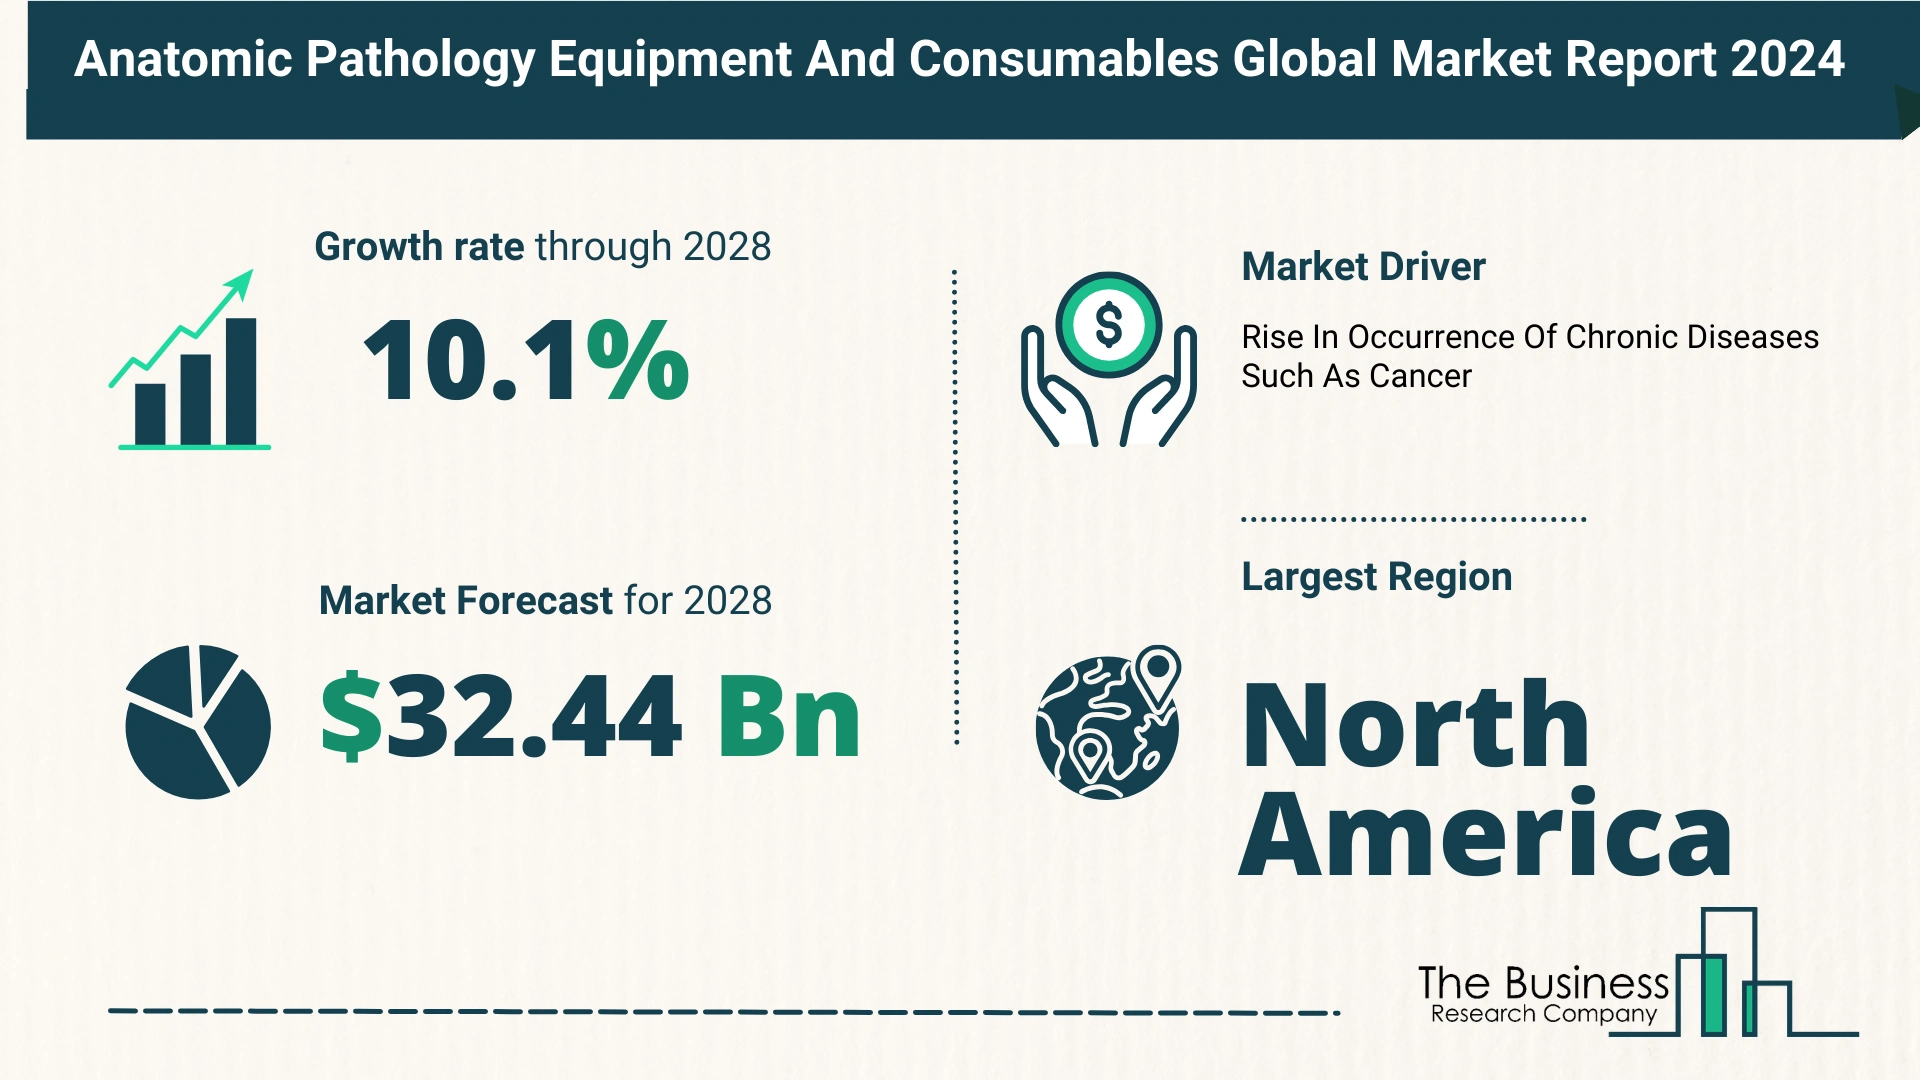 Anatomic Pathology Equipment and Consumables Market Forecast Until 2033 – Estimated Market Size And Growth Rate